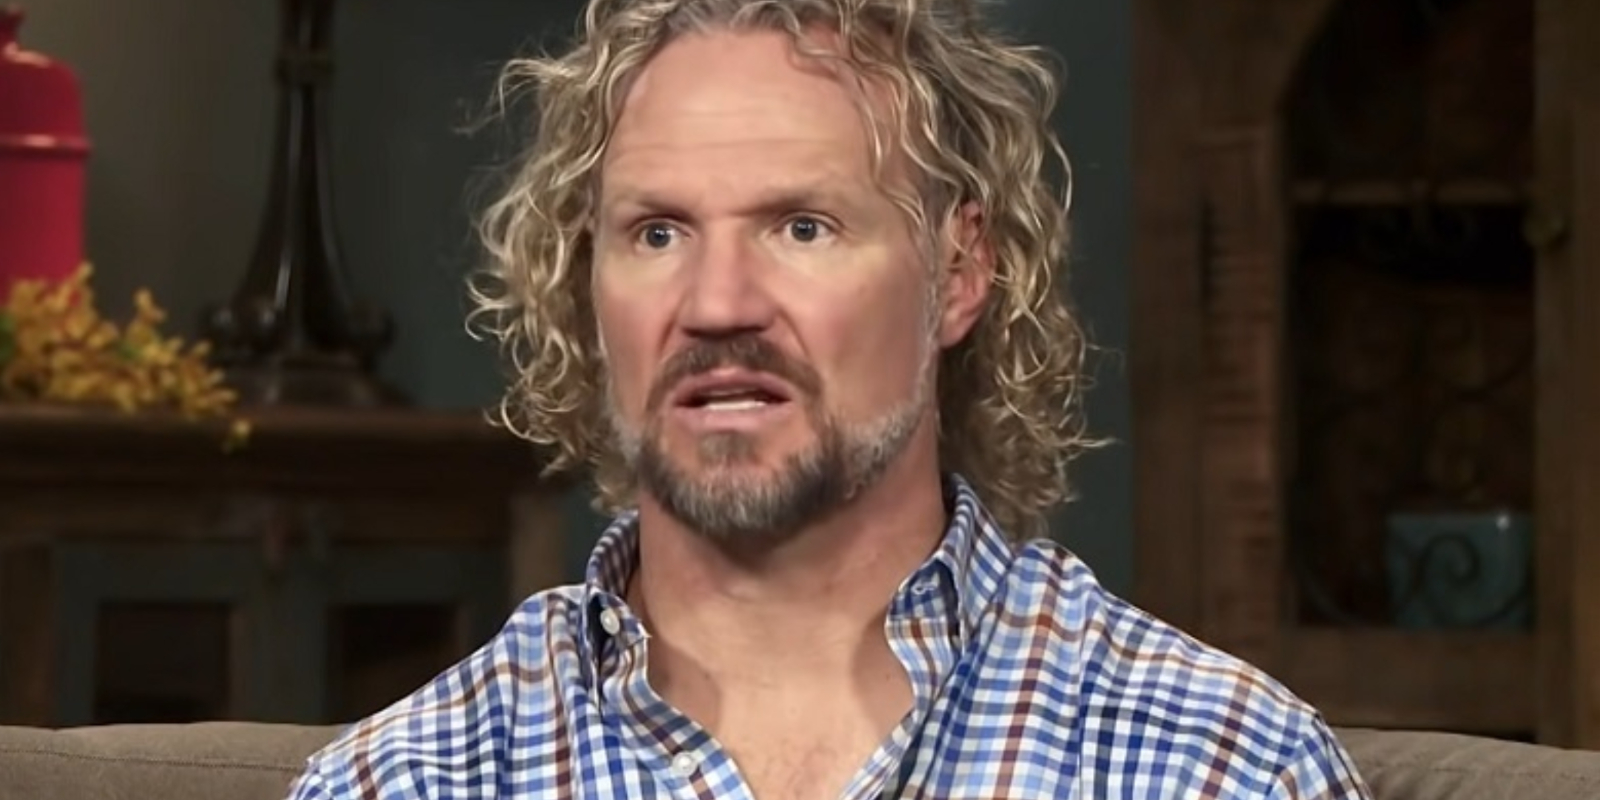 Kody Brown photographed during a confessional for TLC's 'Sister Wives.'